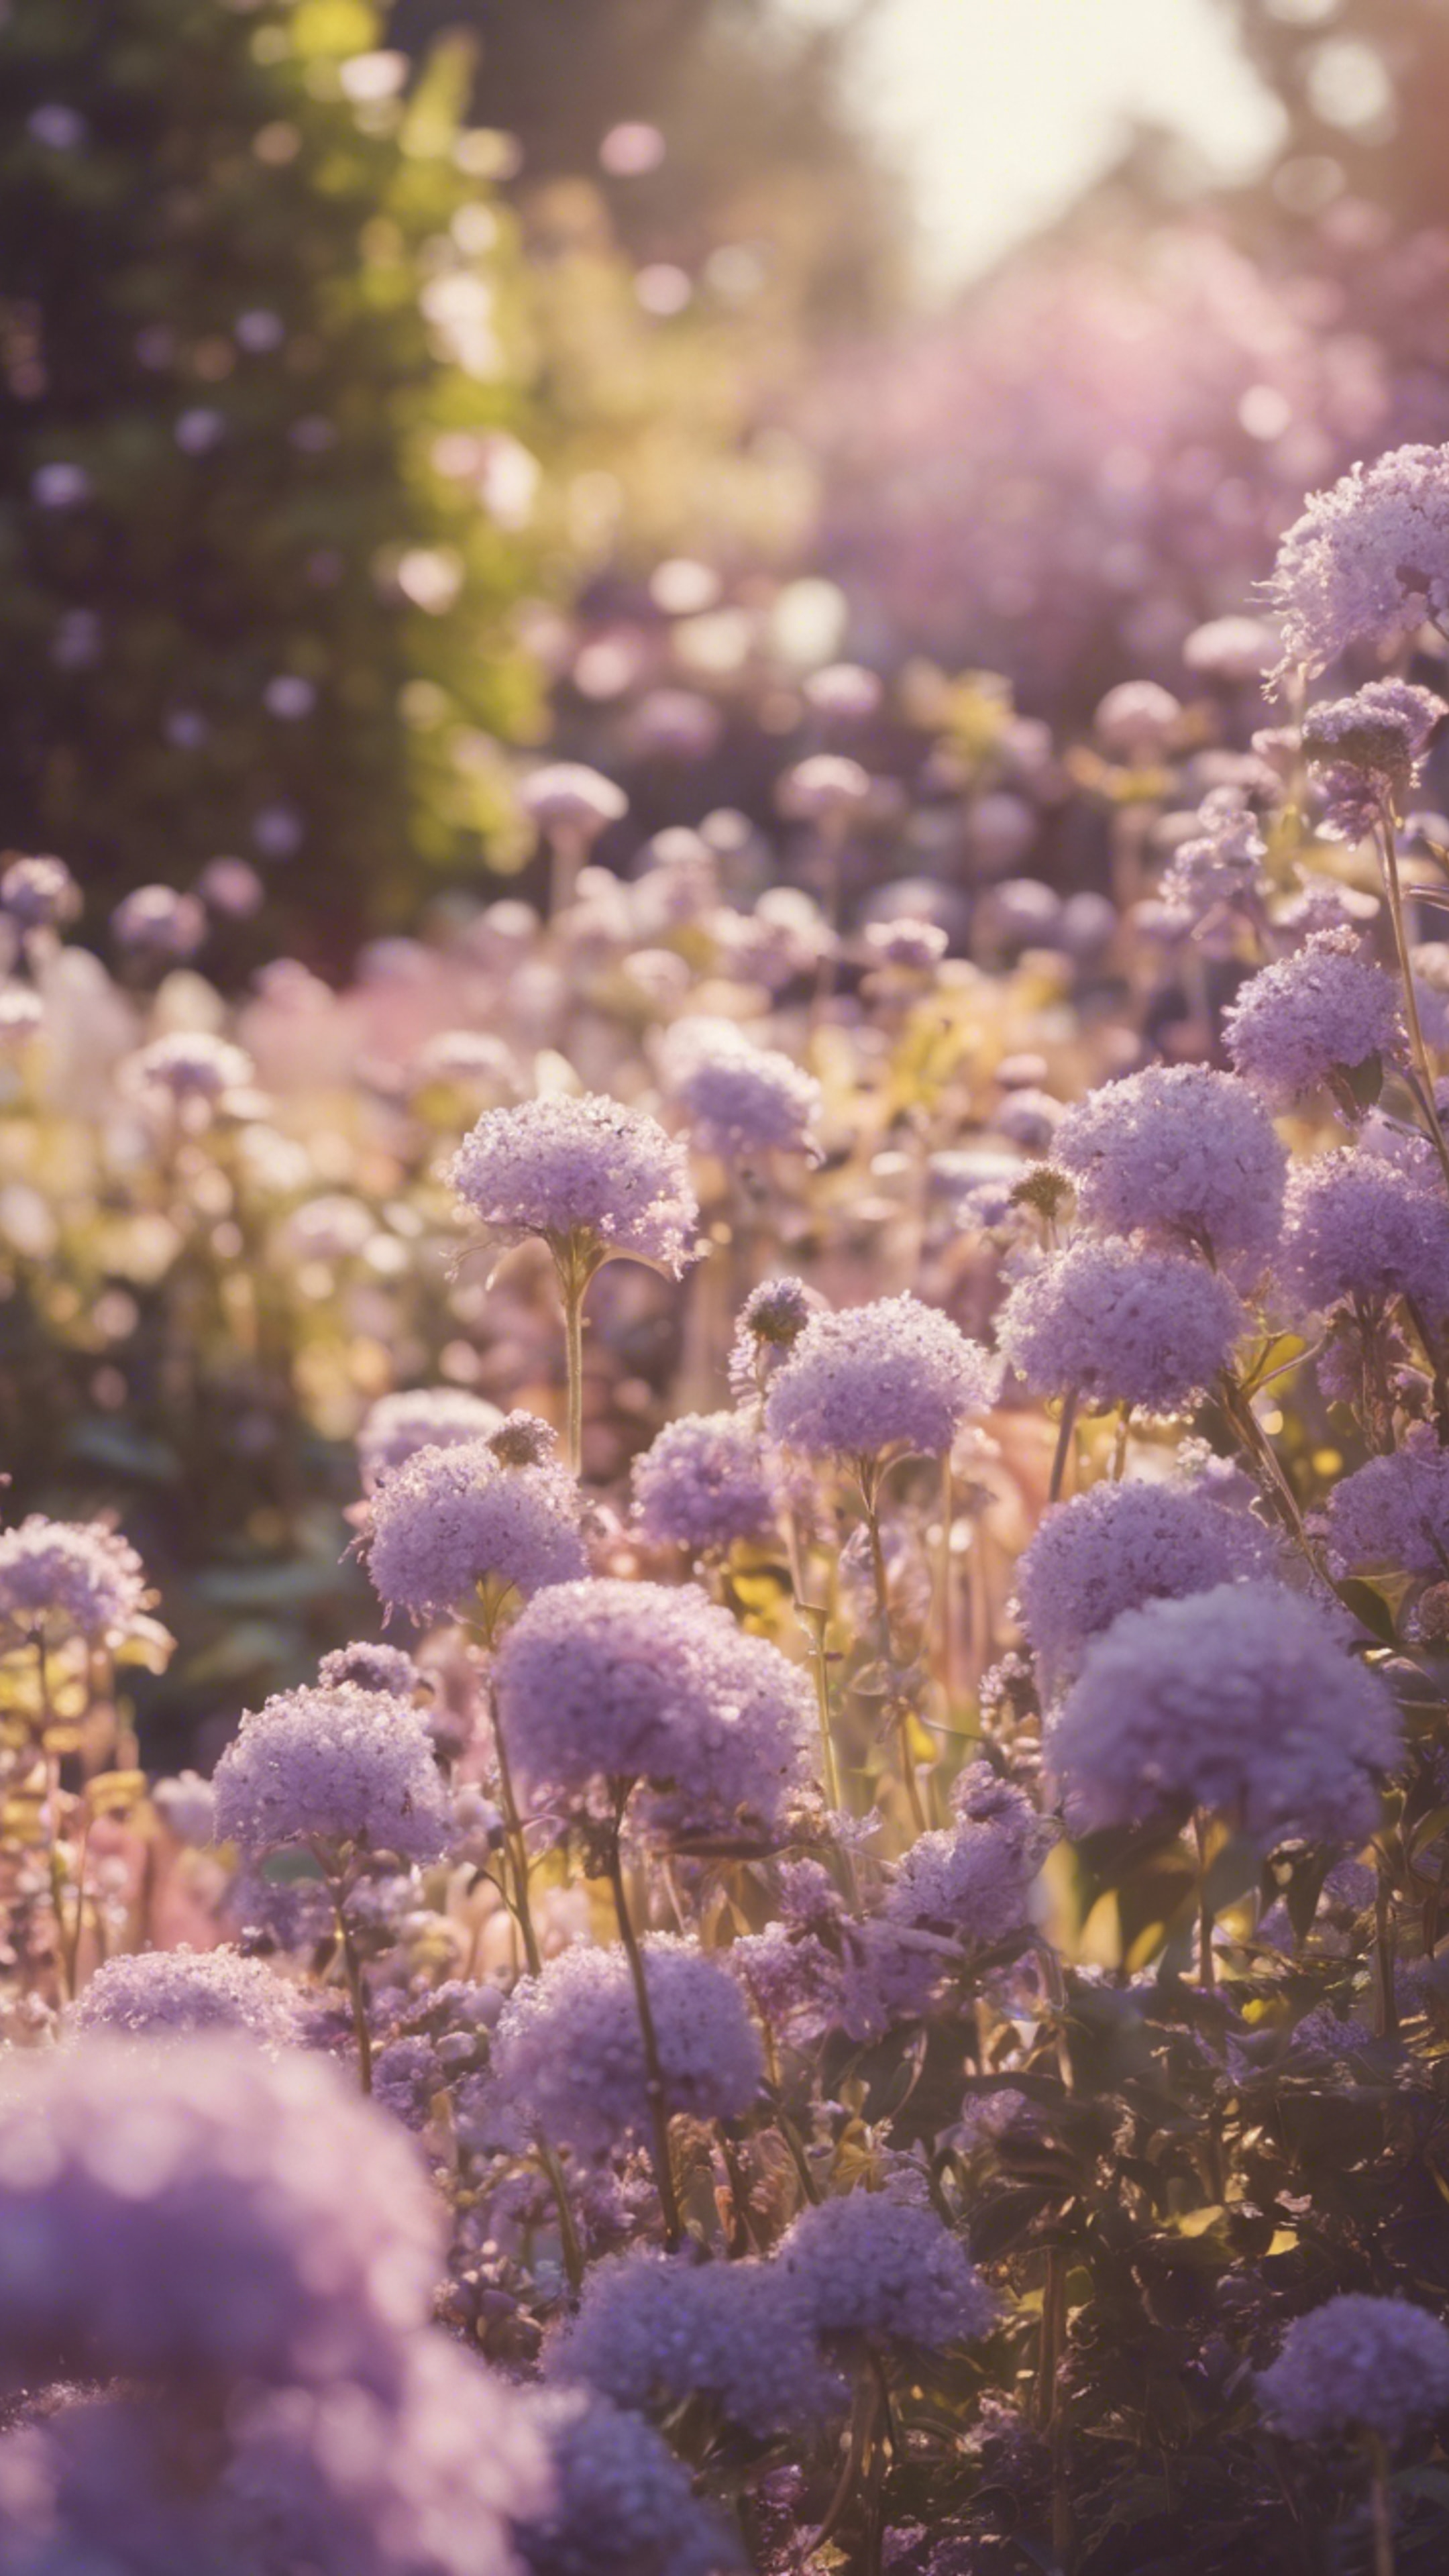 A pastel purple garden in full bloom during a sunny afternoon. Wallpaper[0a3f4f6cbc4b447bb231]